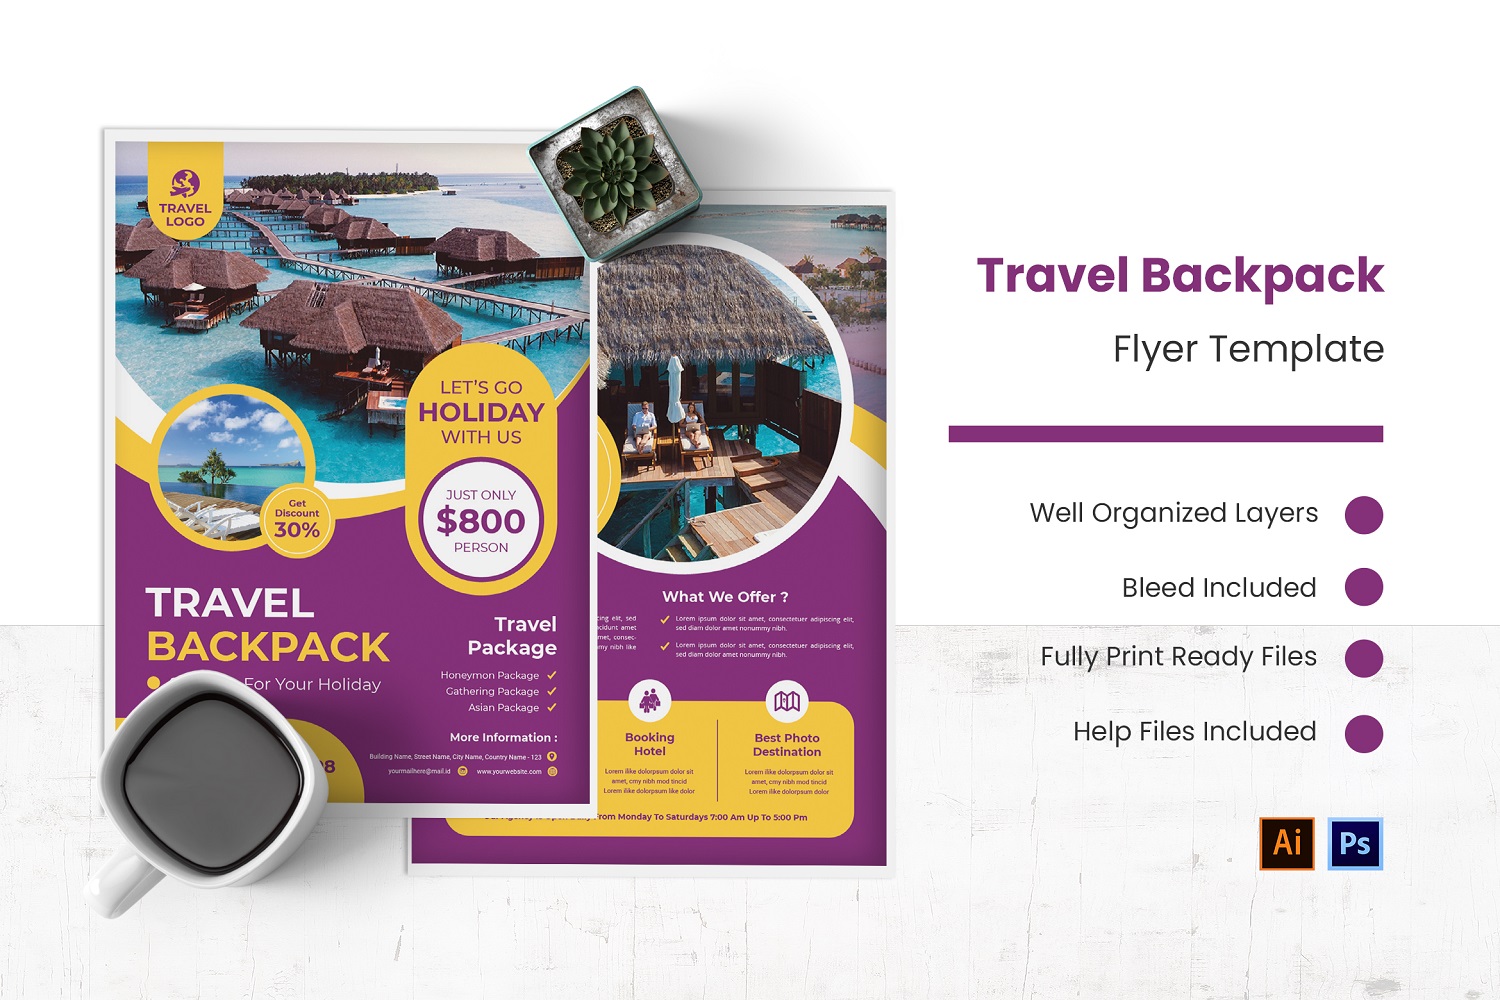 Travel Backpack Flyer Template